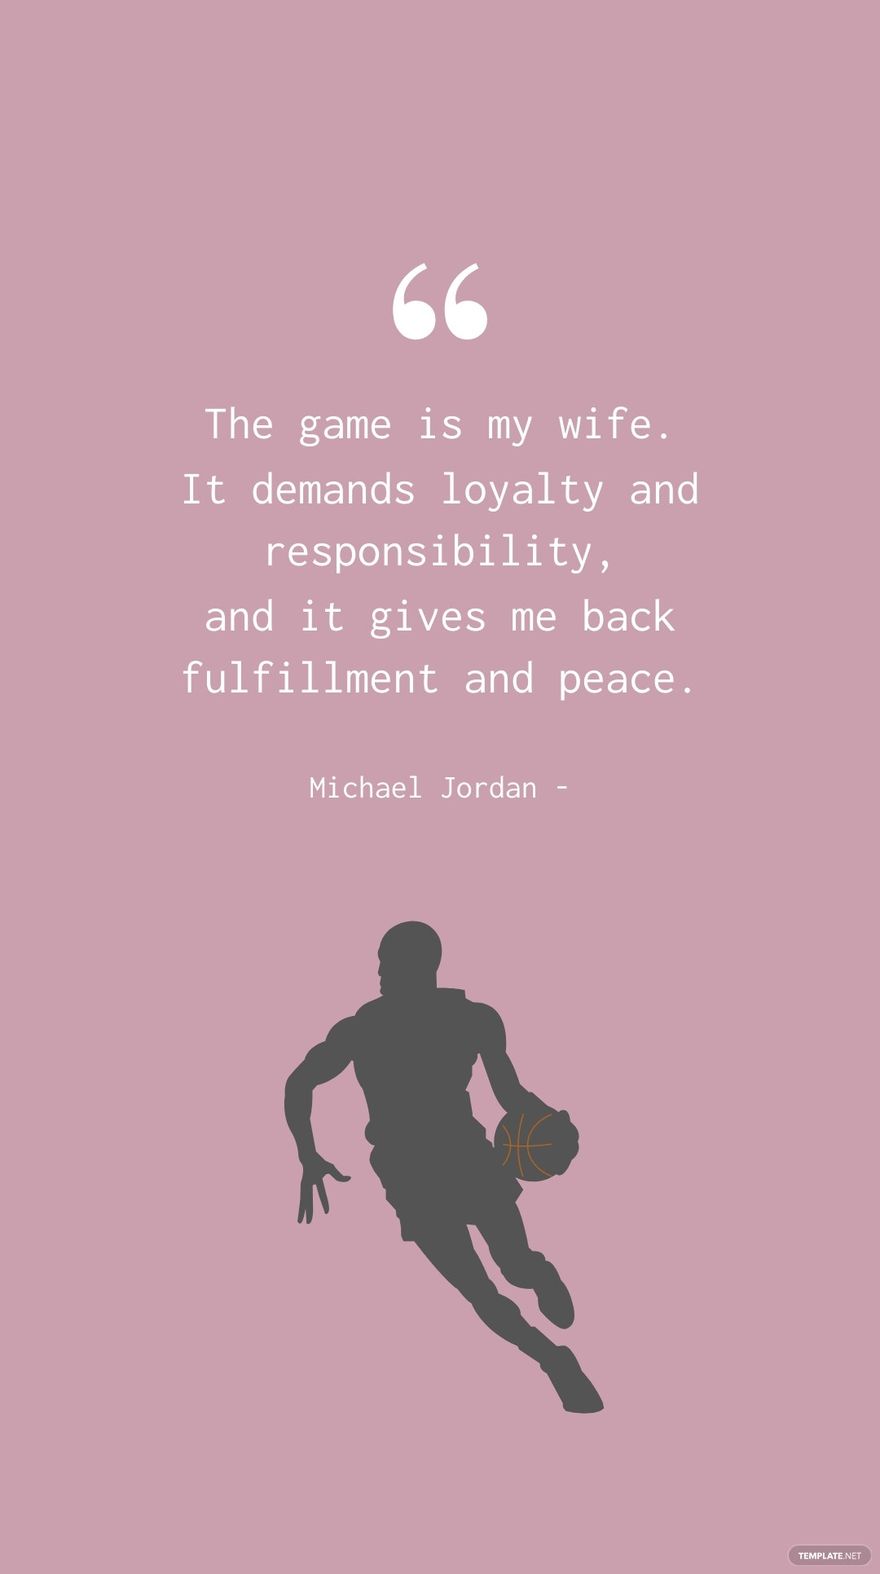 Free Michael Jordan - The game is my wife. It demands loyalty and responsibility, and it gives me back fulfillment and peace. in JPG